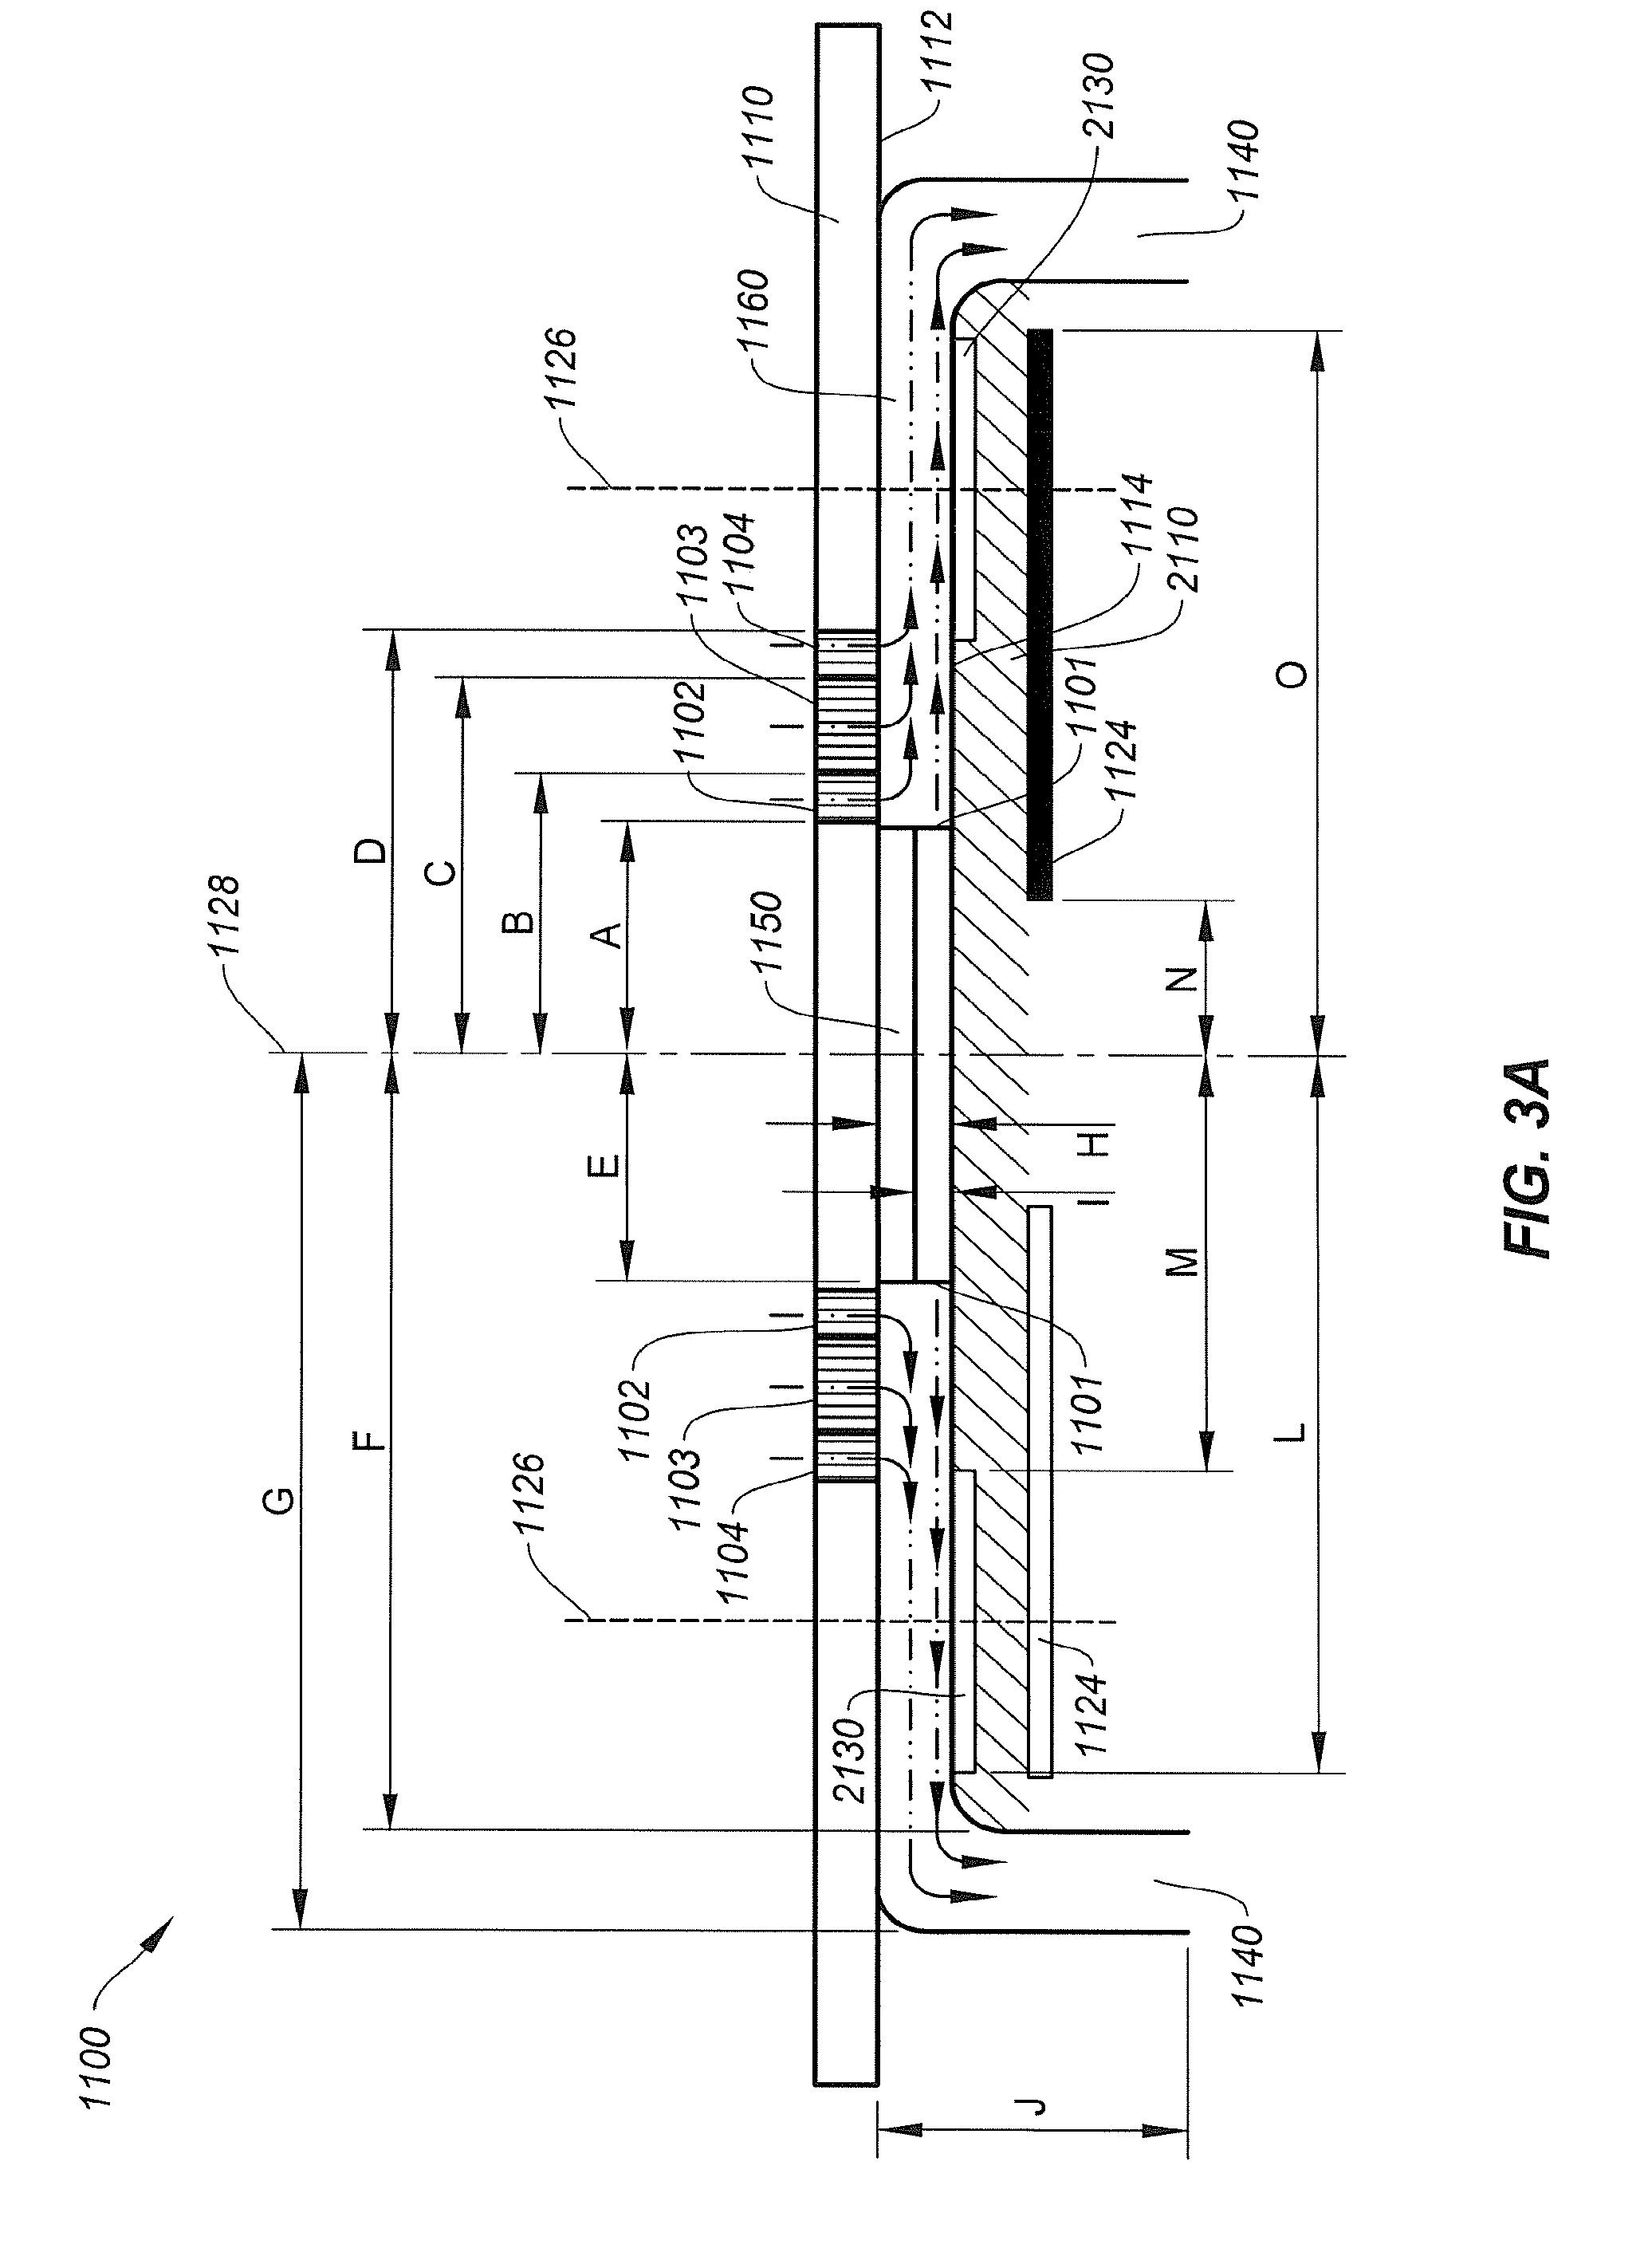 Heating systems for thin film formation